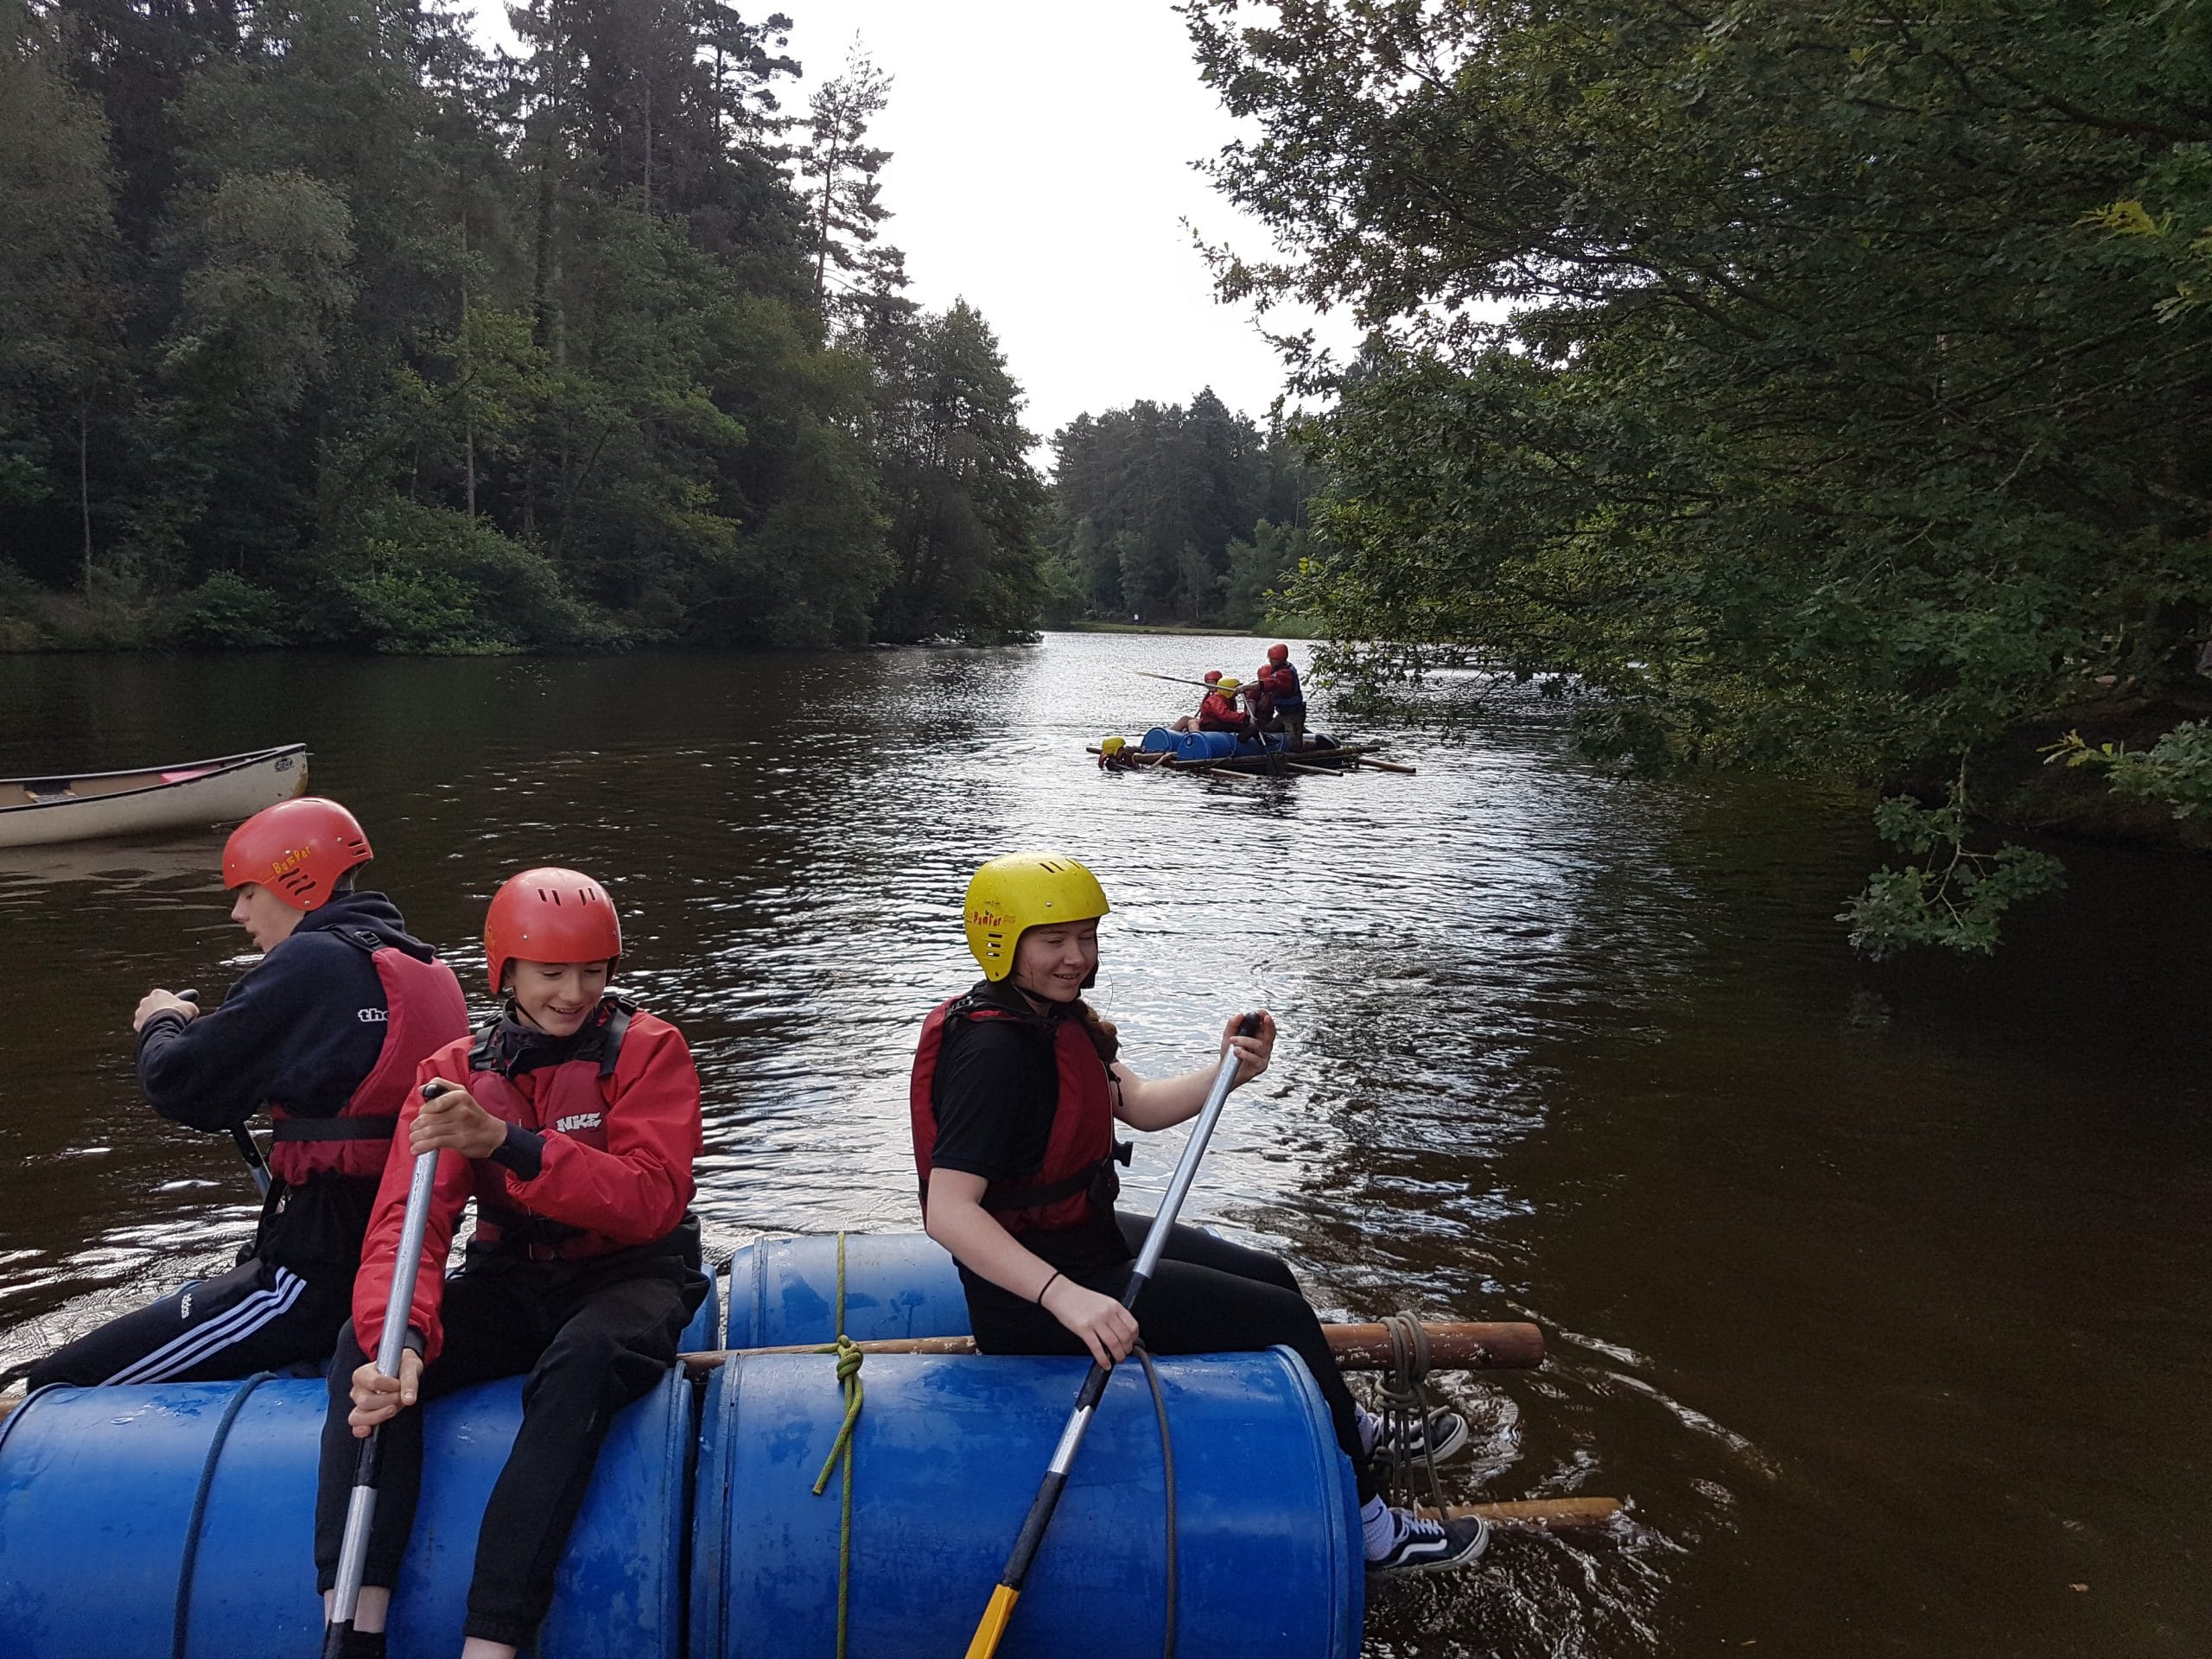 Young people on rafts in the water